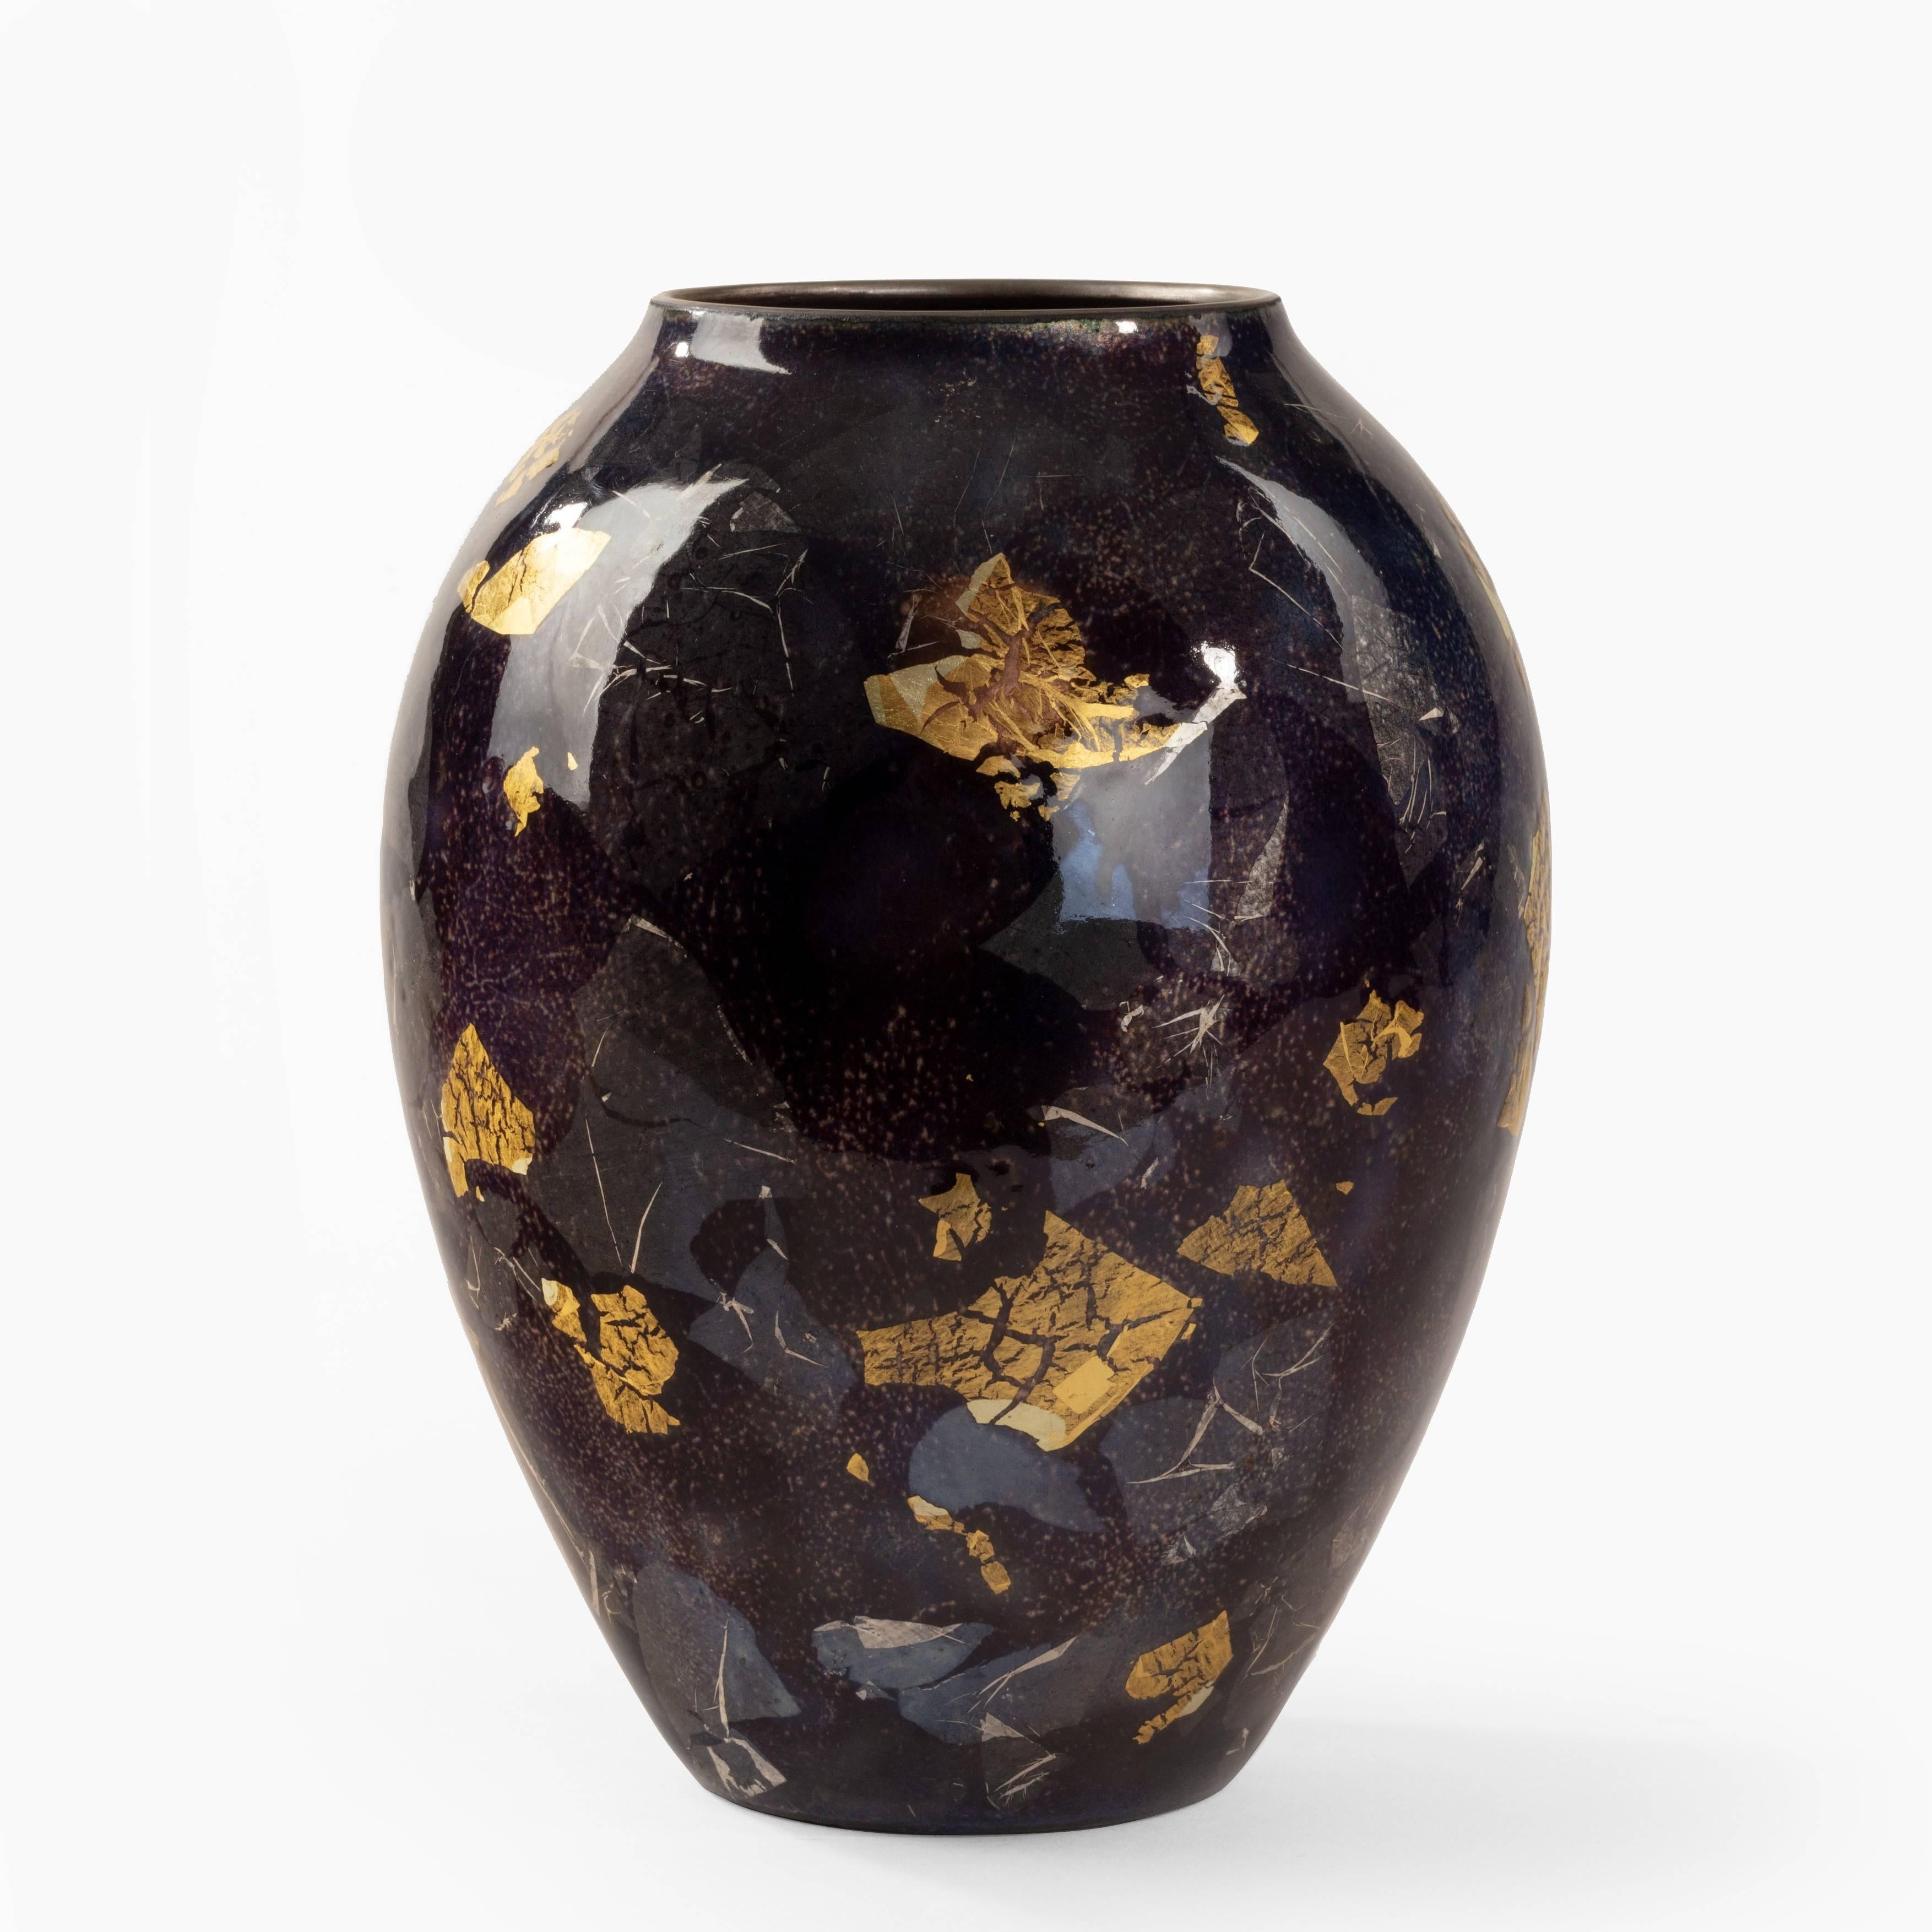 English Silver and Gold Leaf Cloisonné Vase by Sukiku